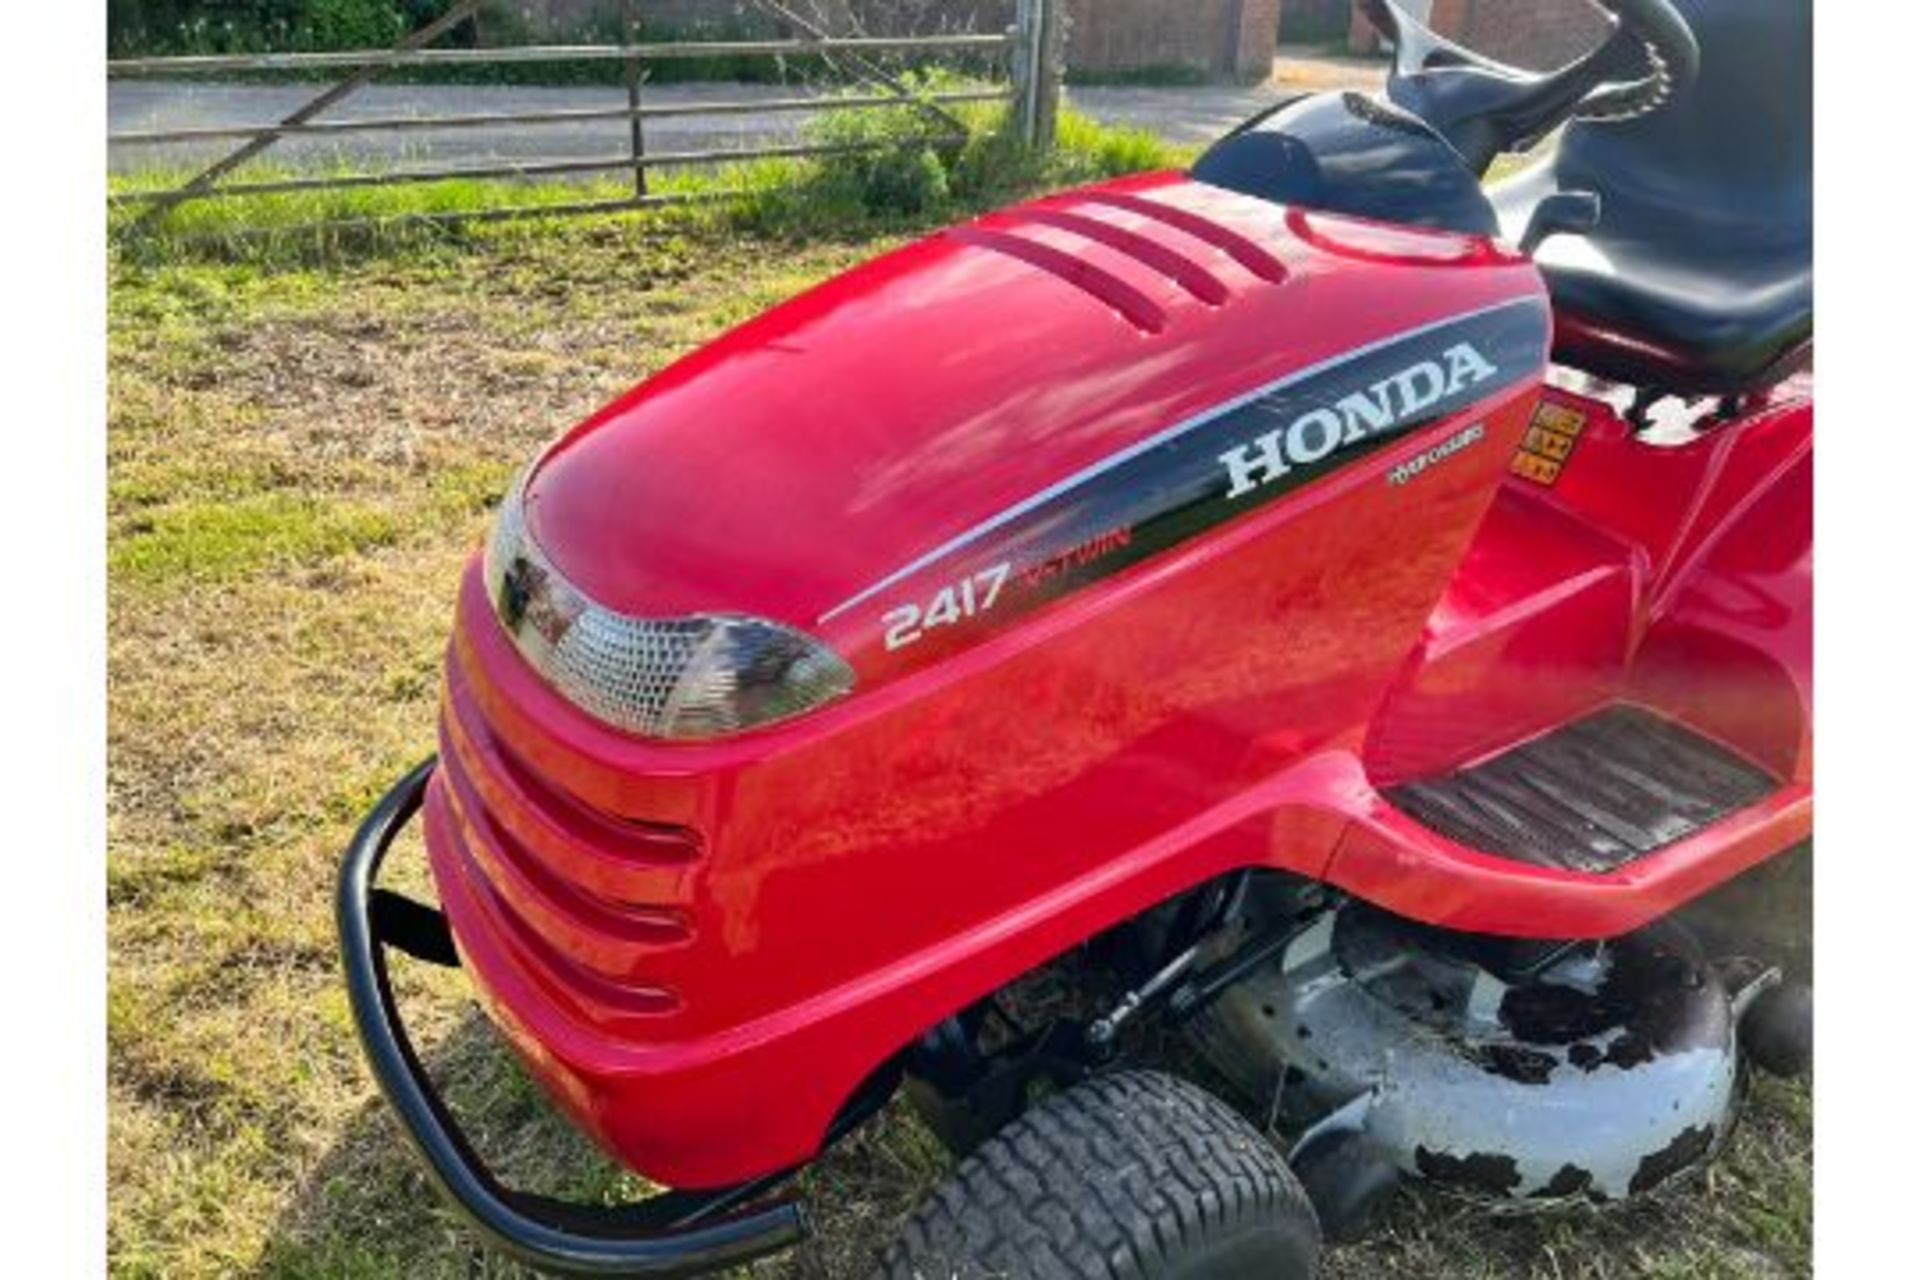 Honda 2417 Ride On Mower With Rear Collector, Runs Drives Cuts And Collects "PLUS VAT" - Image 7 of 22